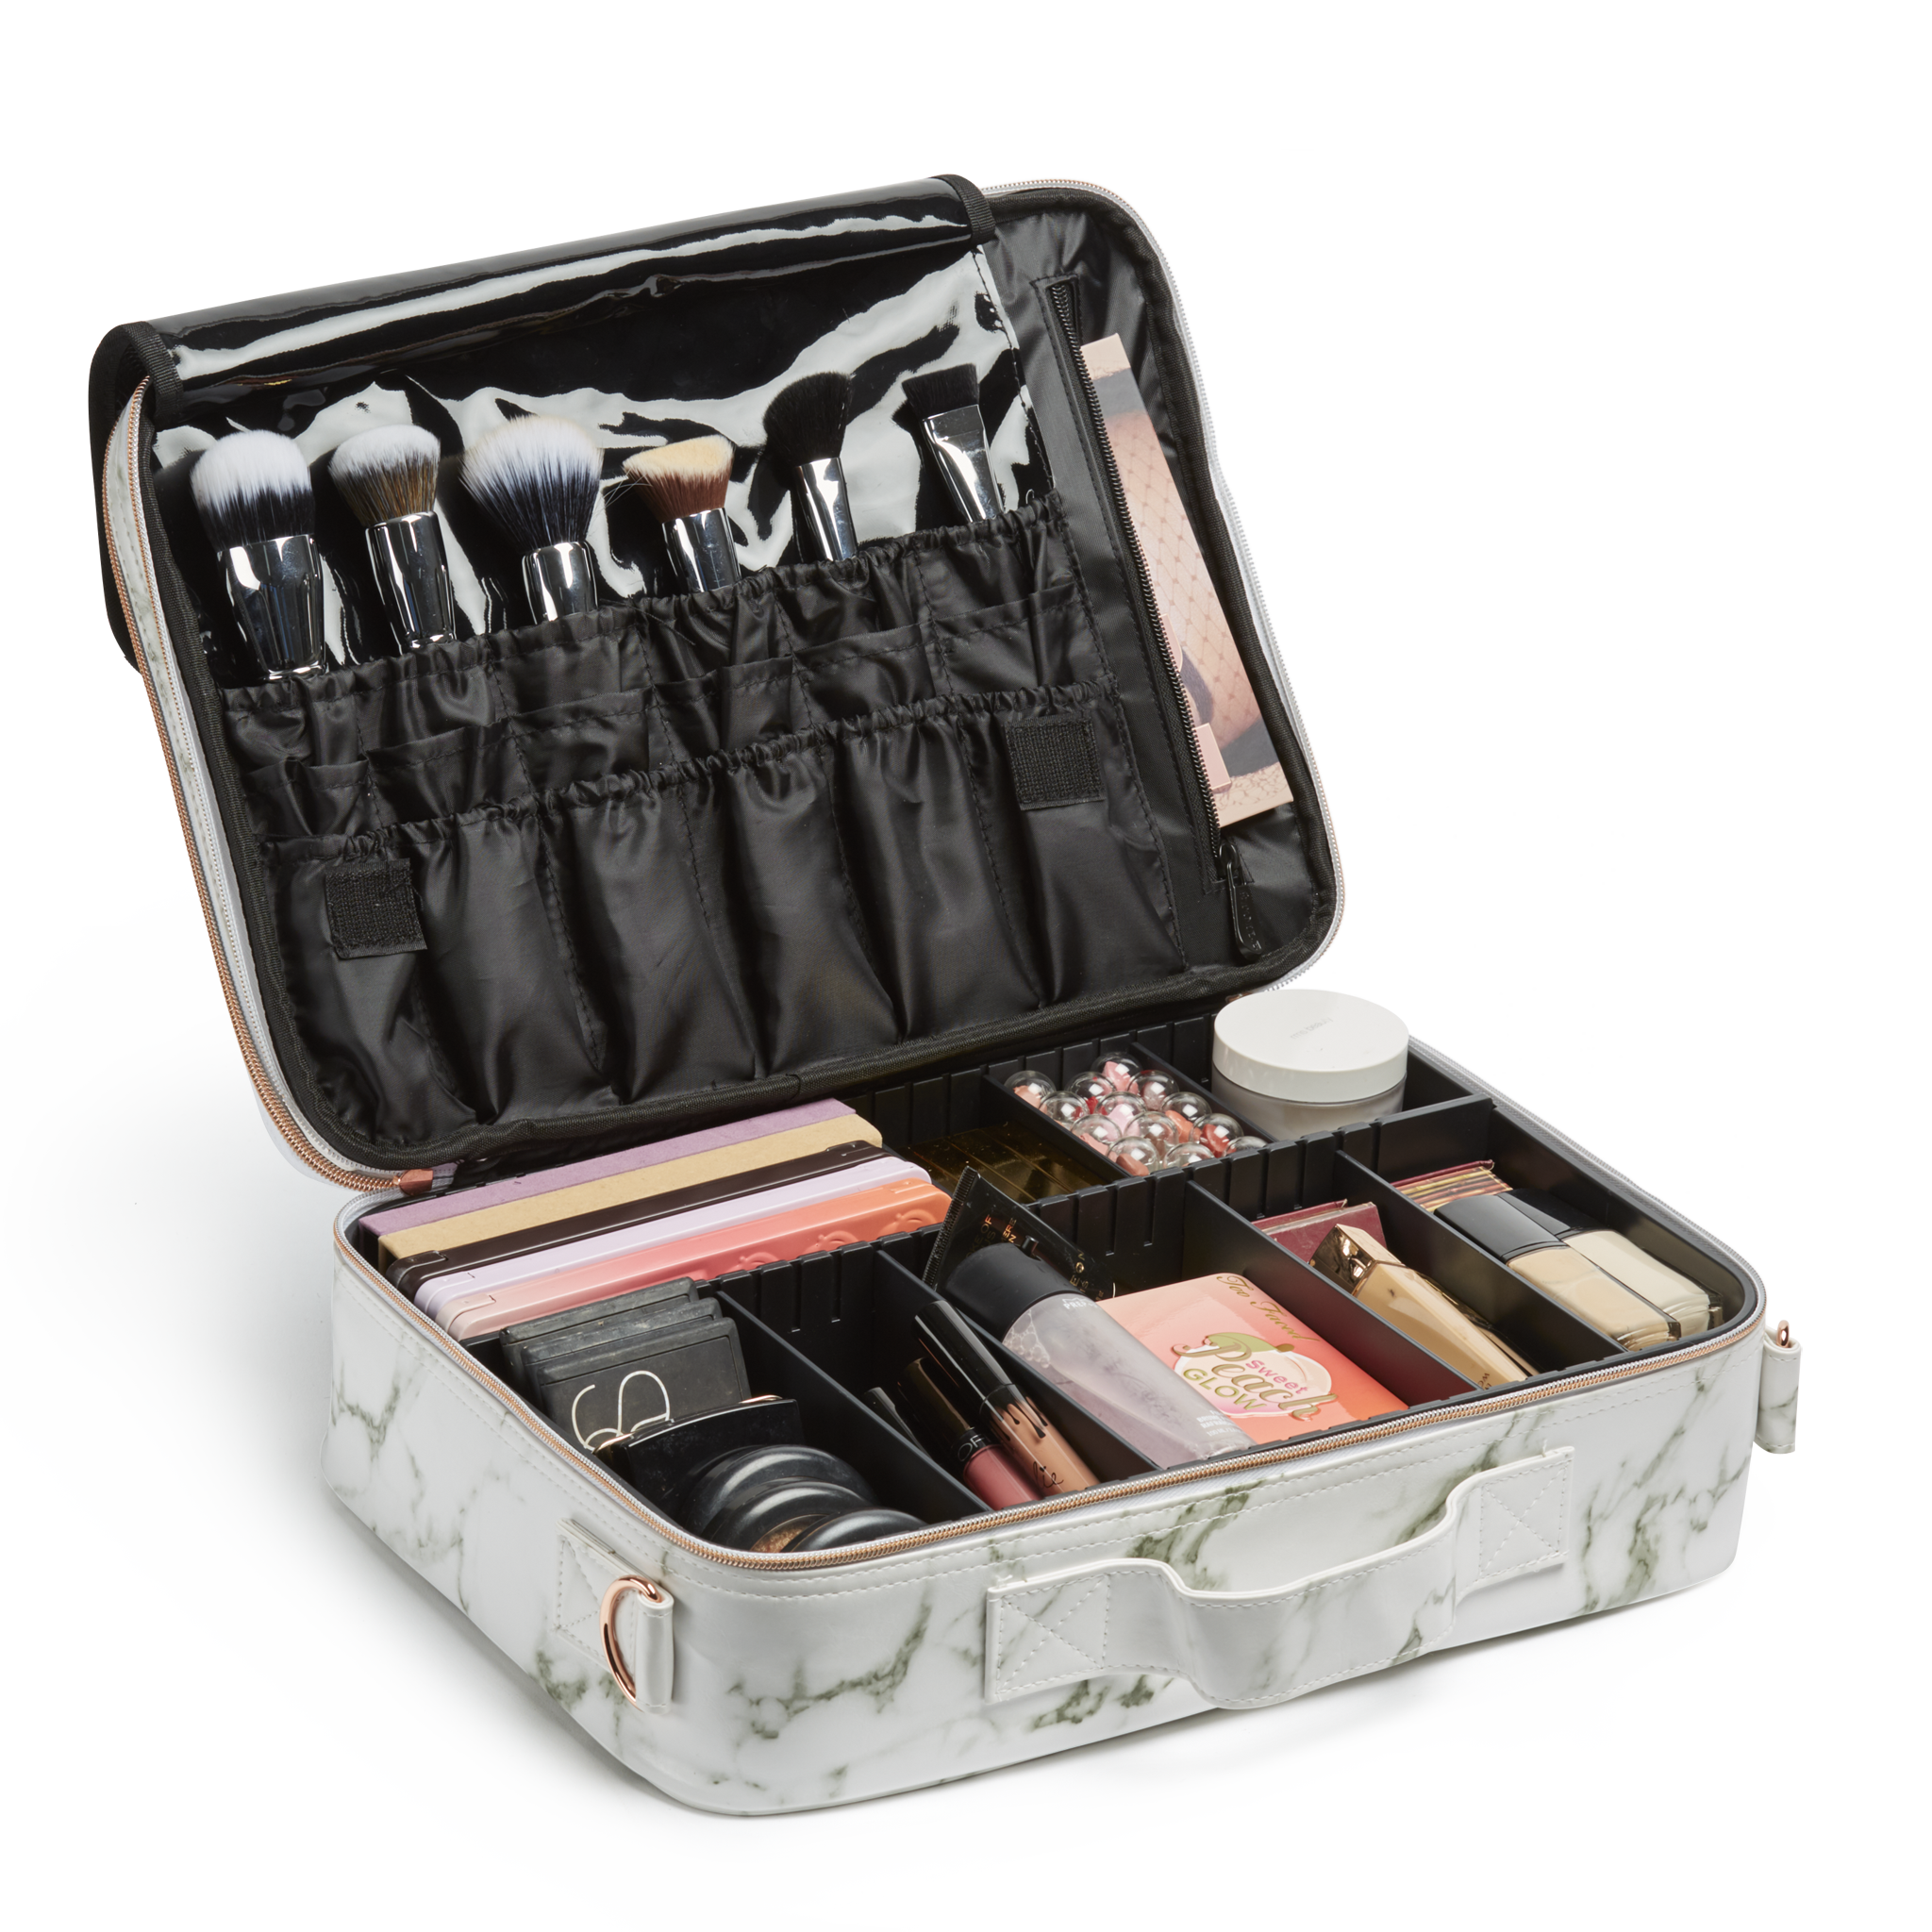 Your Favourite Cosmetic Travel Case Just Got a Stylish Update